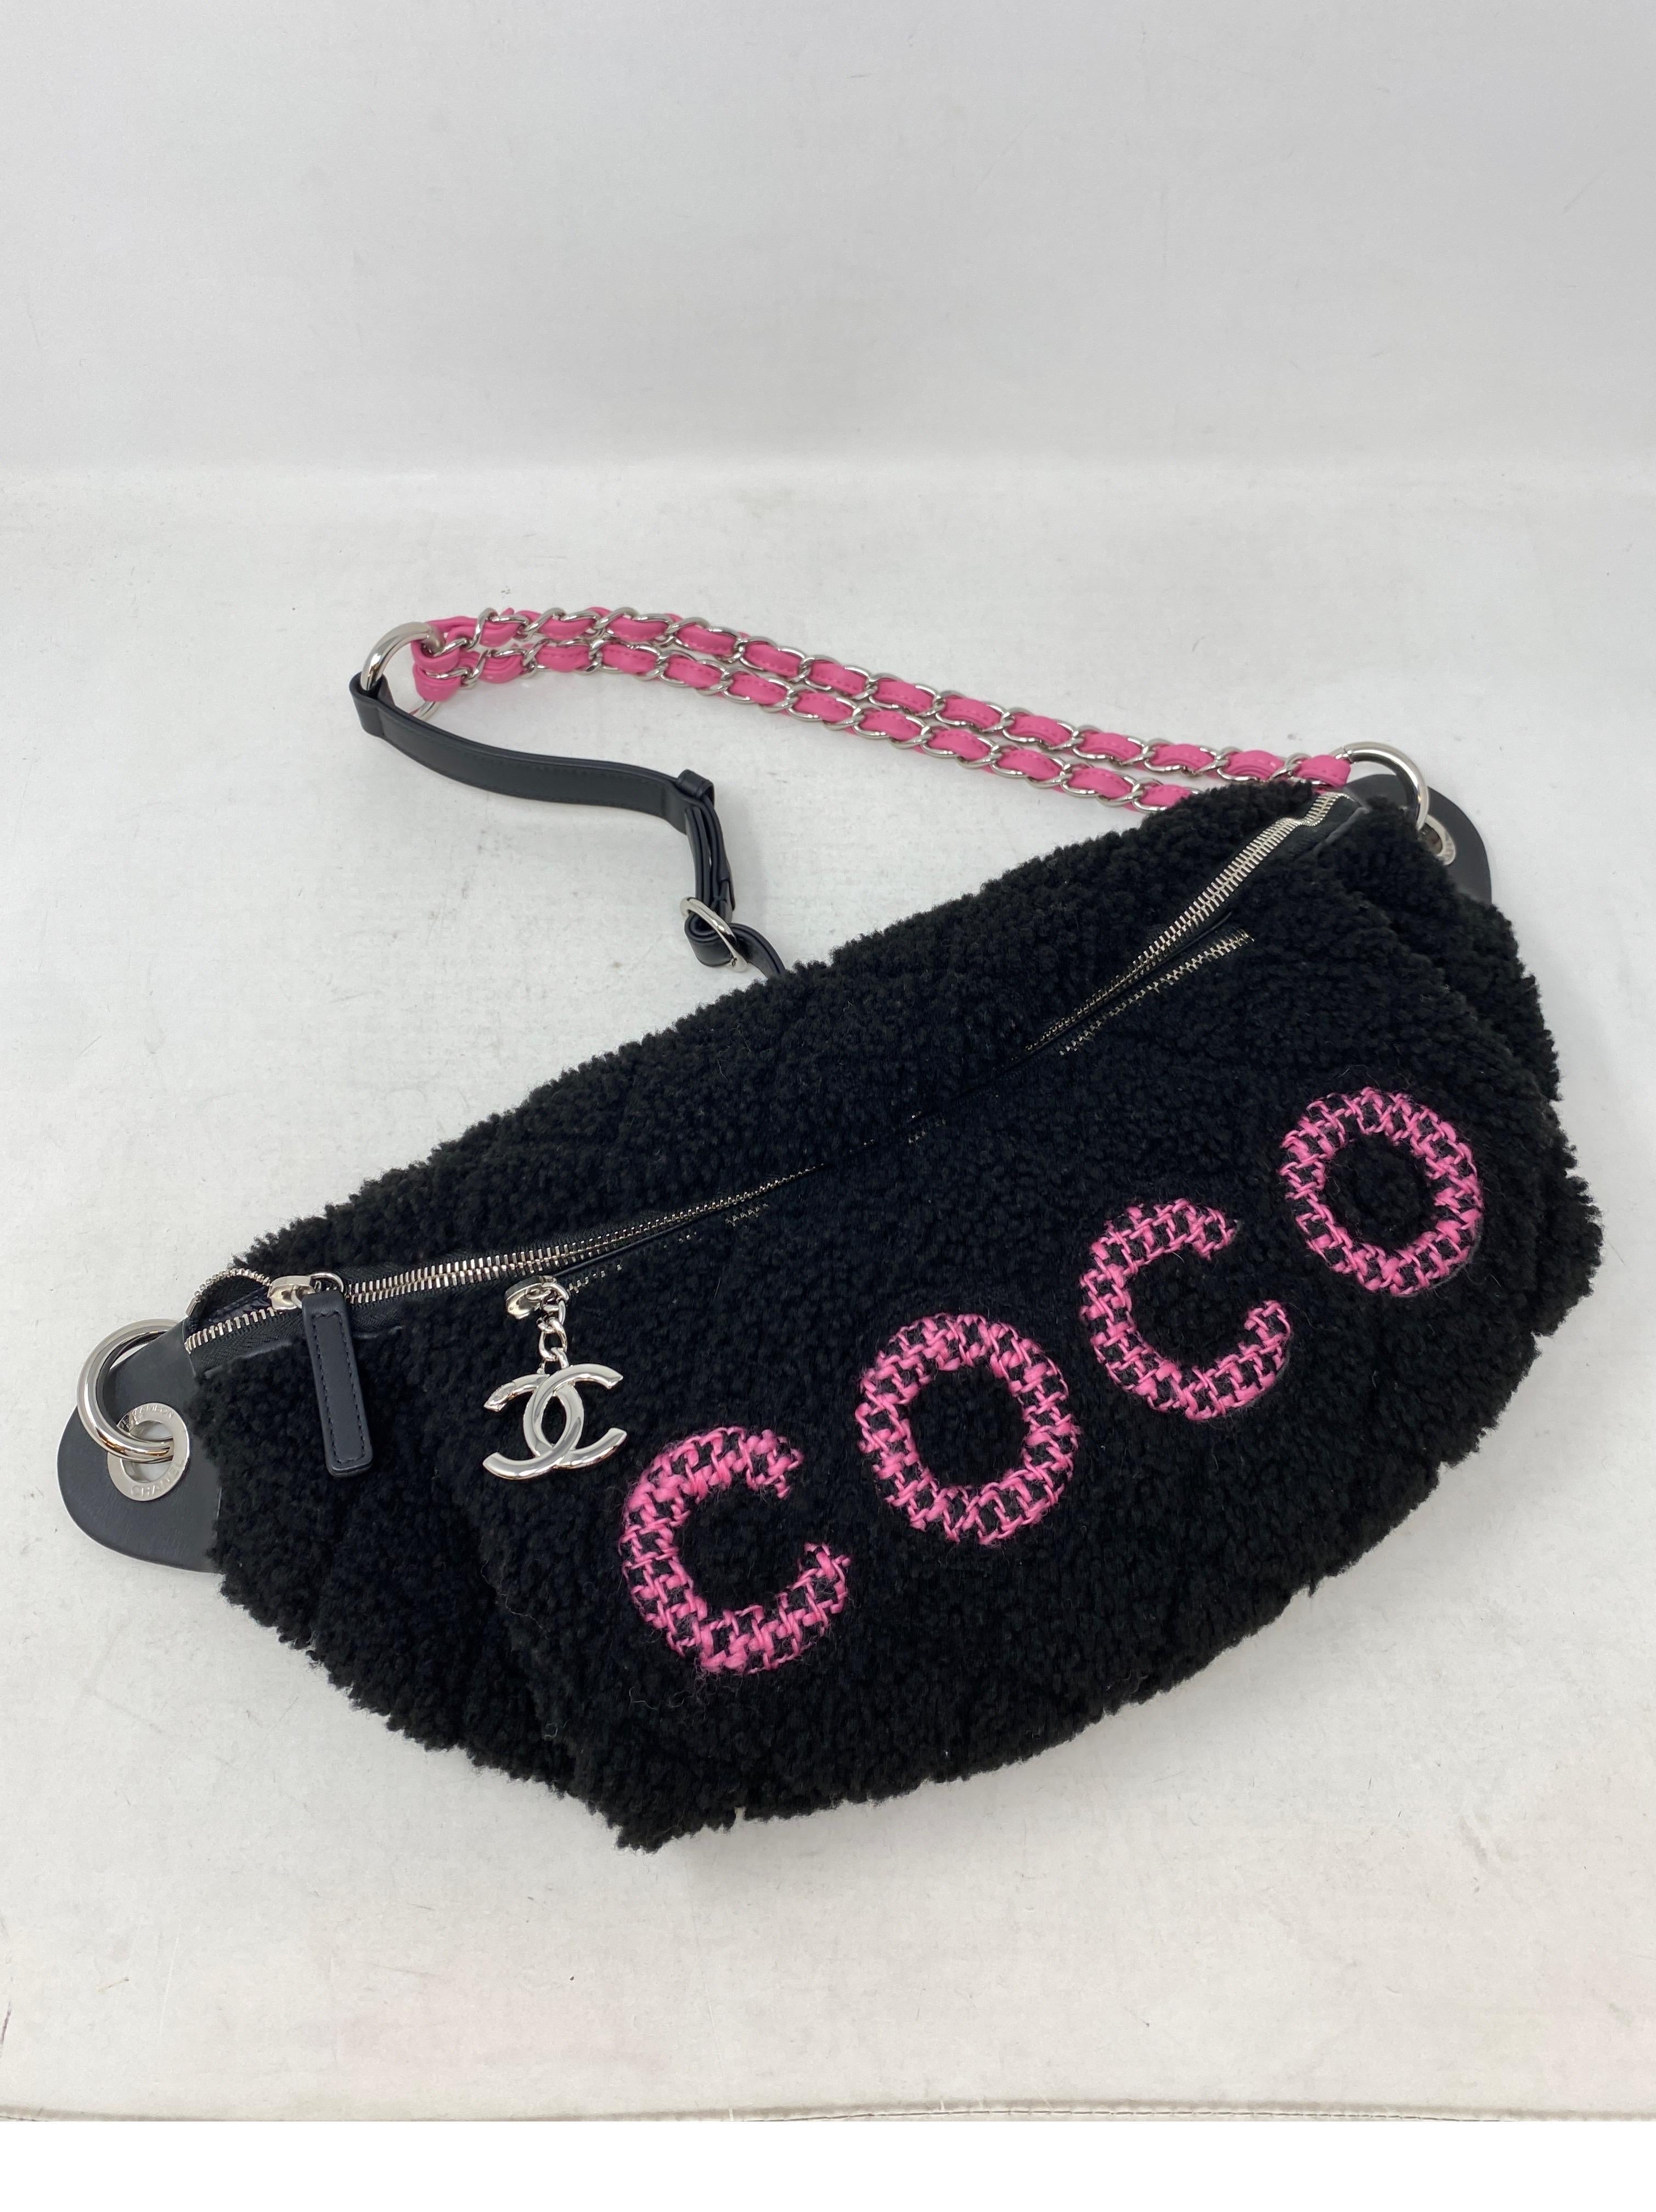 Chanel Coco Black Shearling Bum Bag. Mint like new condition. Rare collector's piece. Hot pink Coco lettering shearling fur waist bag or cross shoulder bag. Unique style and limited edition. Full set. Includes authenticity card, dust bag, and